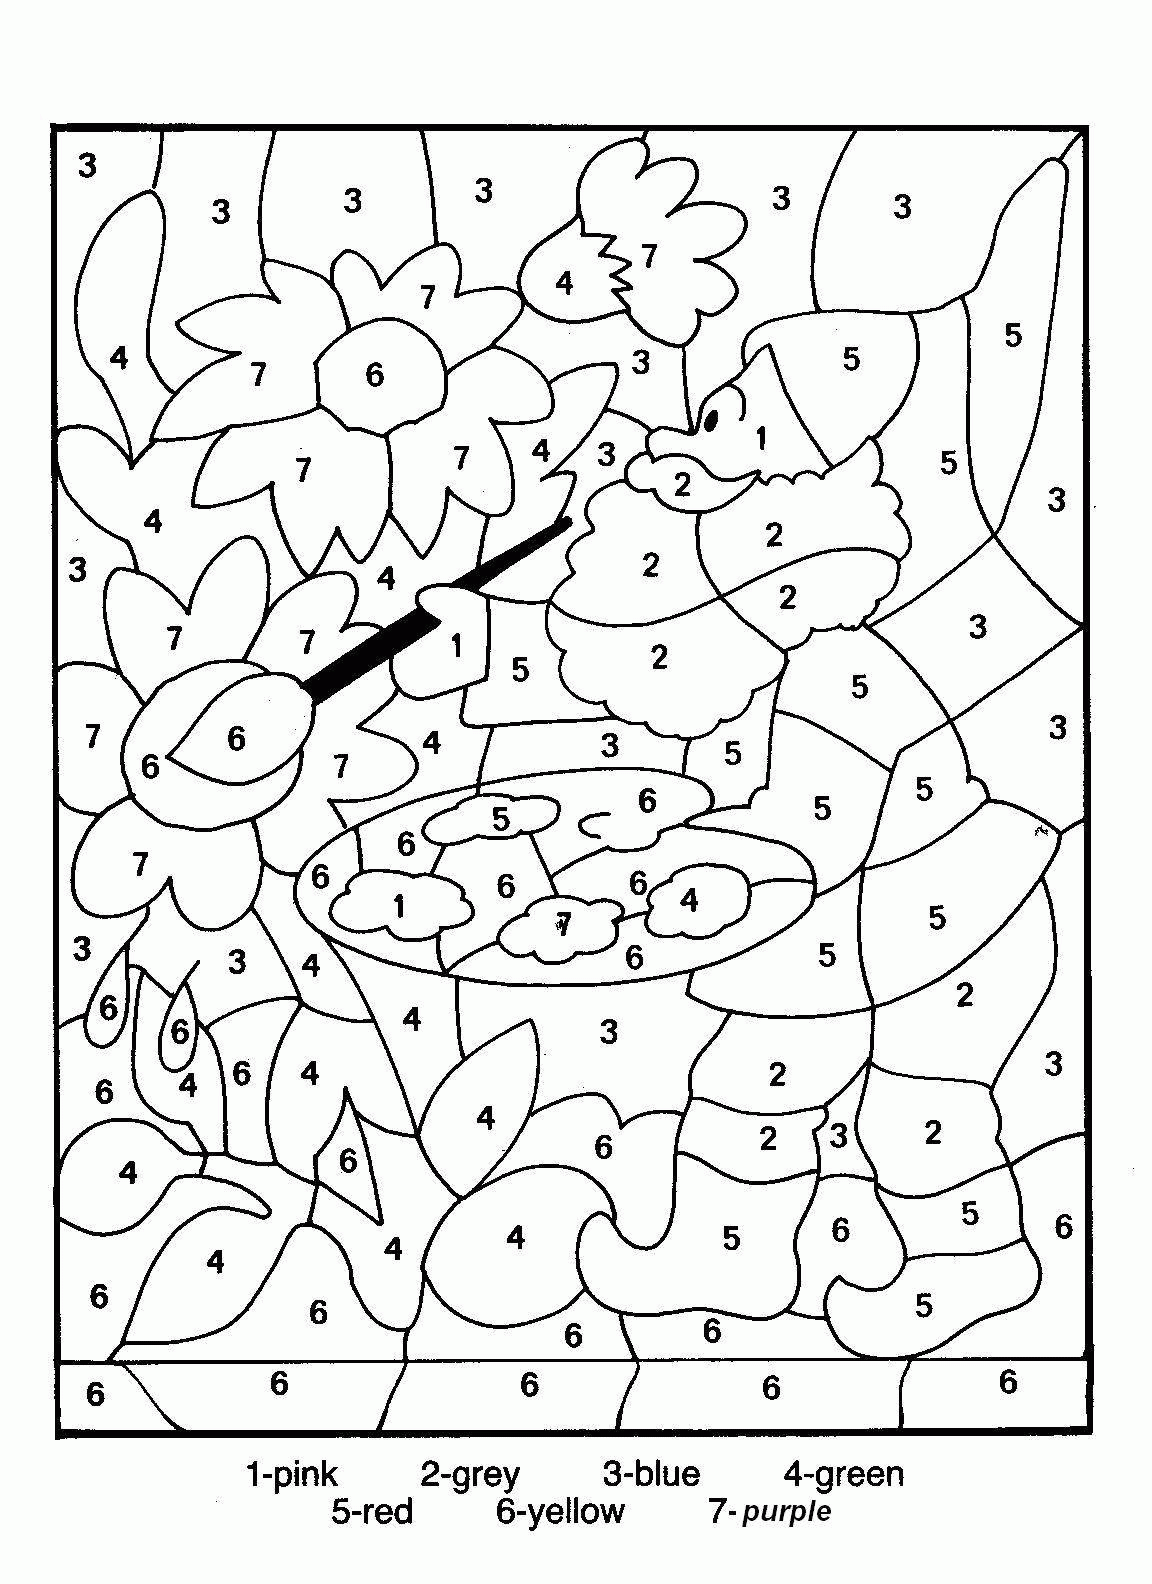 Minions coloring pages - Free 31+ Printable Fortnite Color By Number Pages